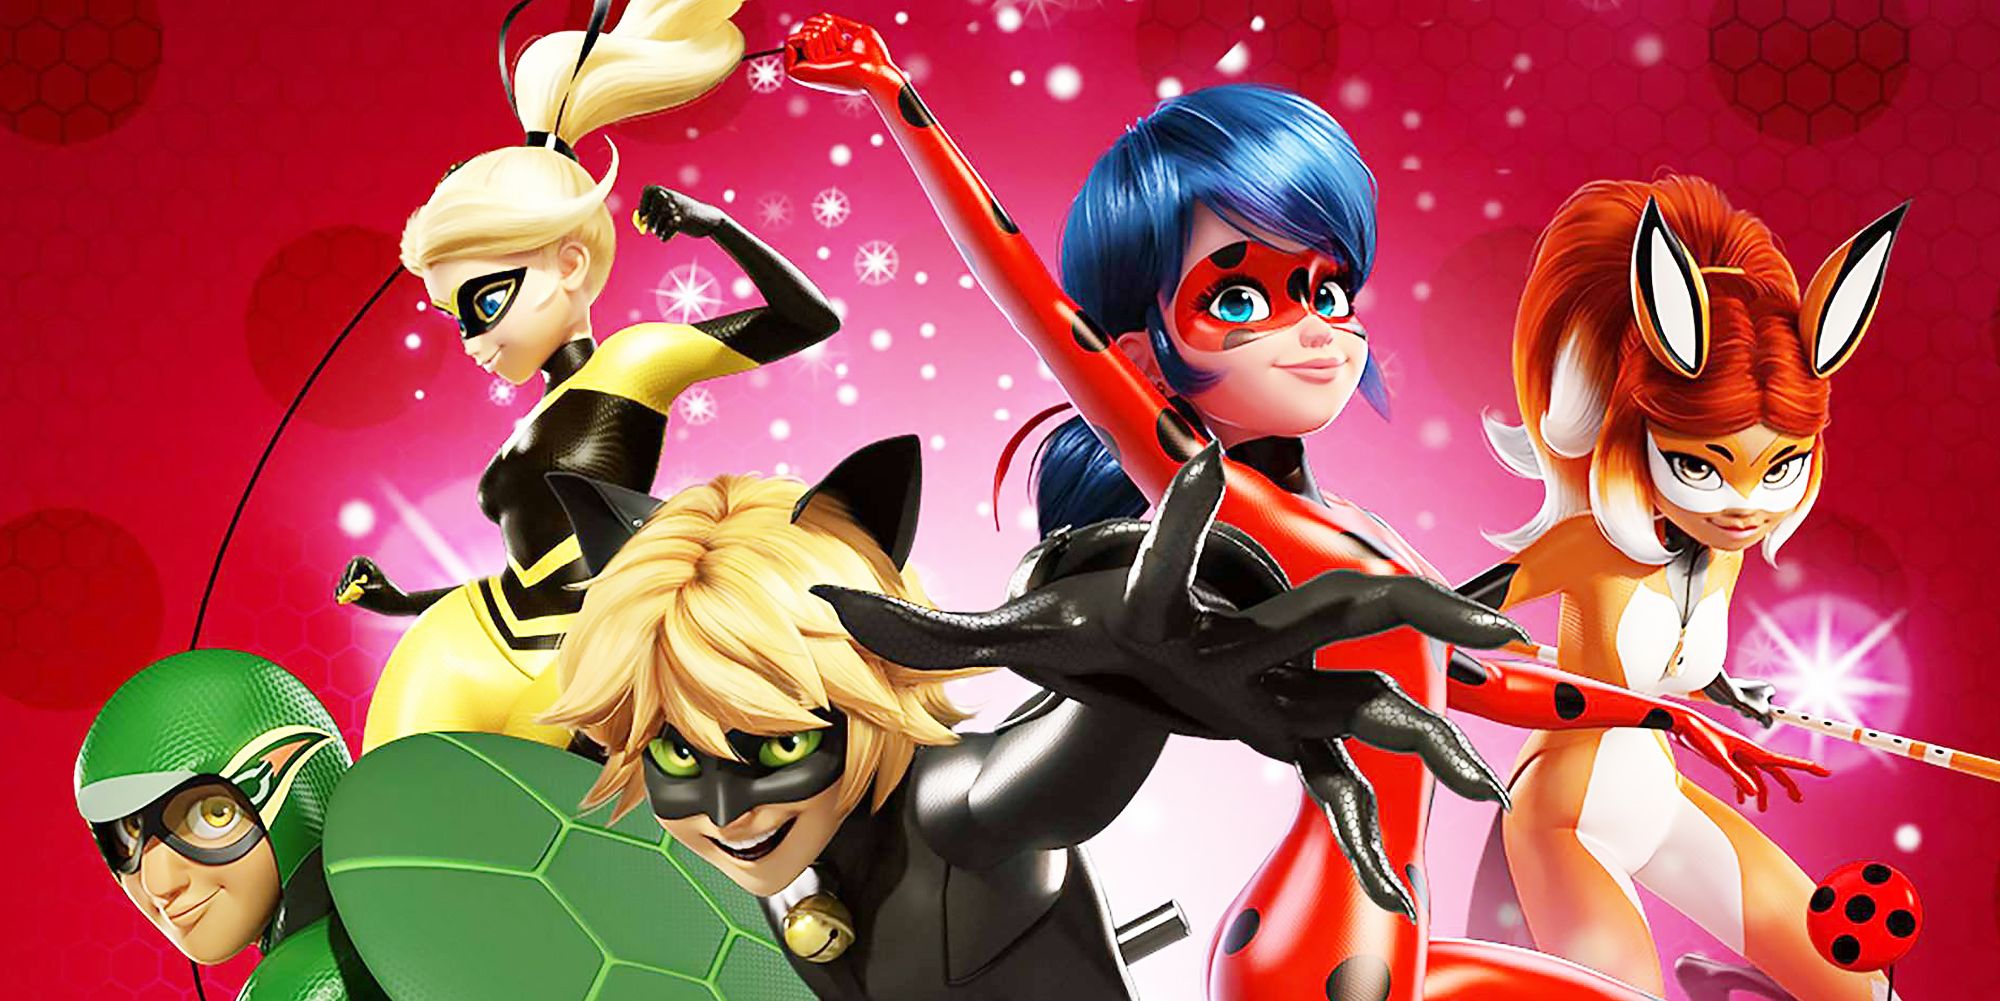 Watch the full new york tv movie from the miraculous ladybug saga! 